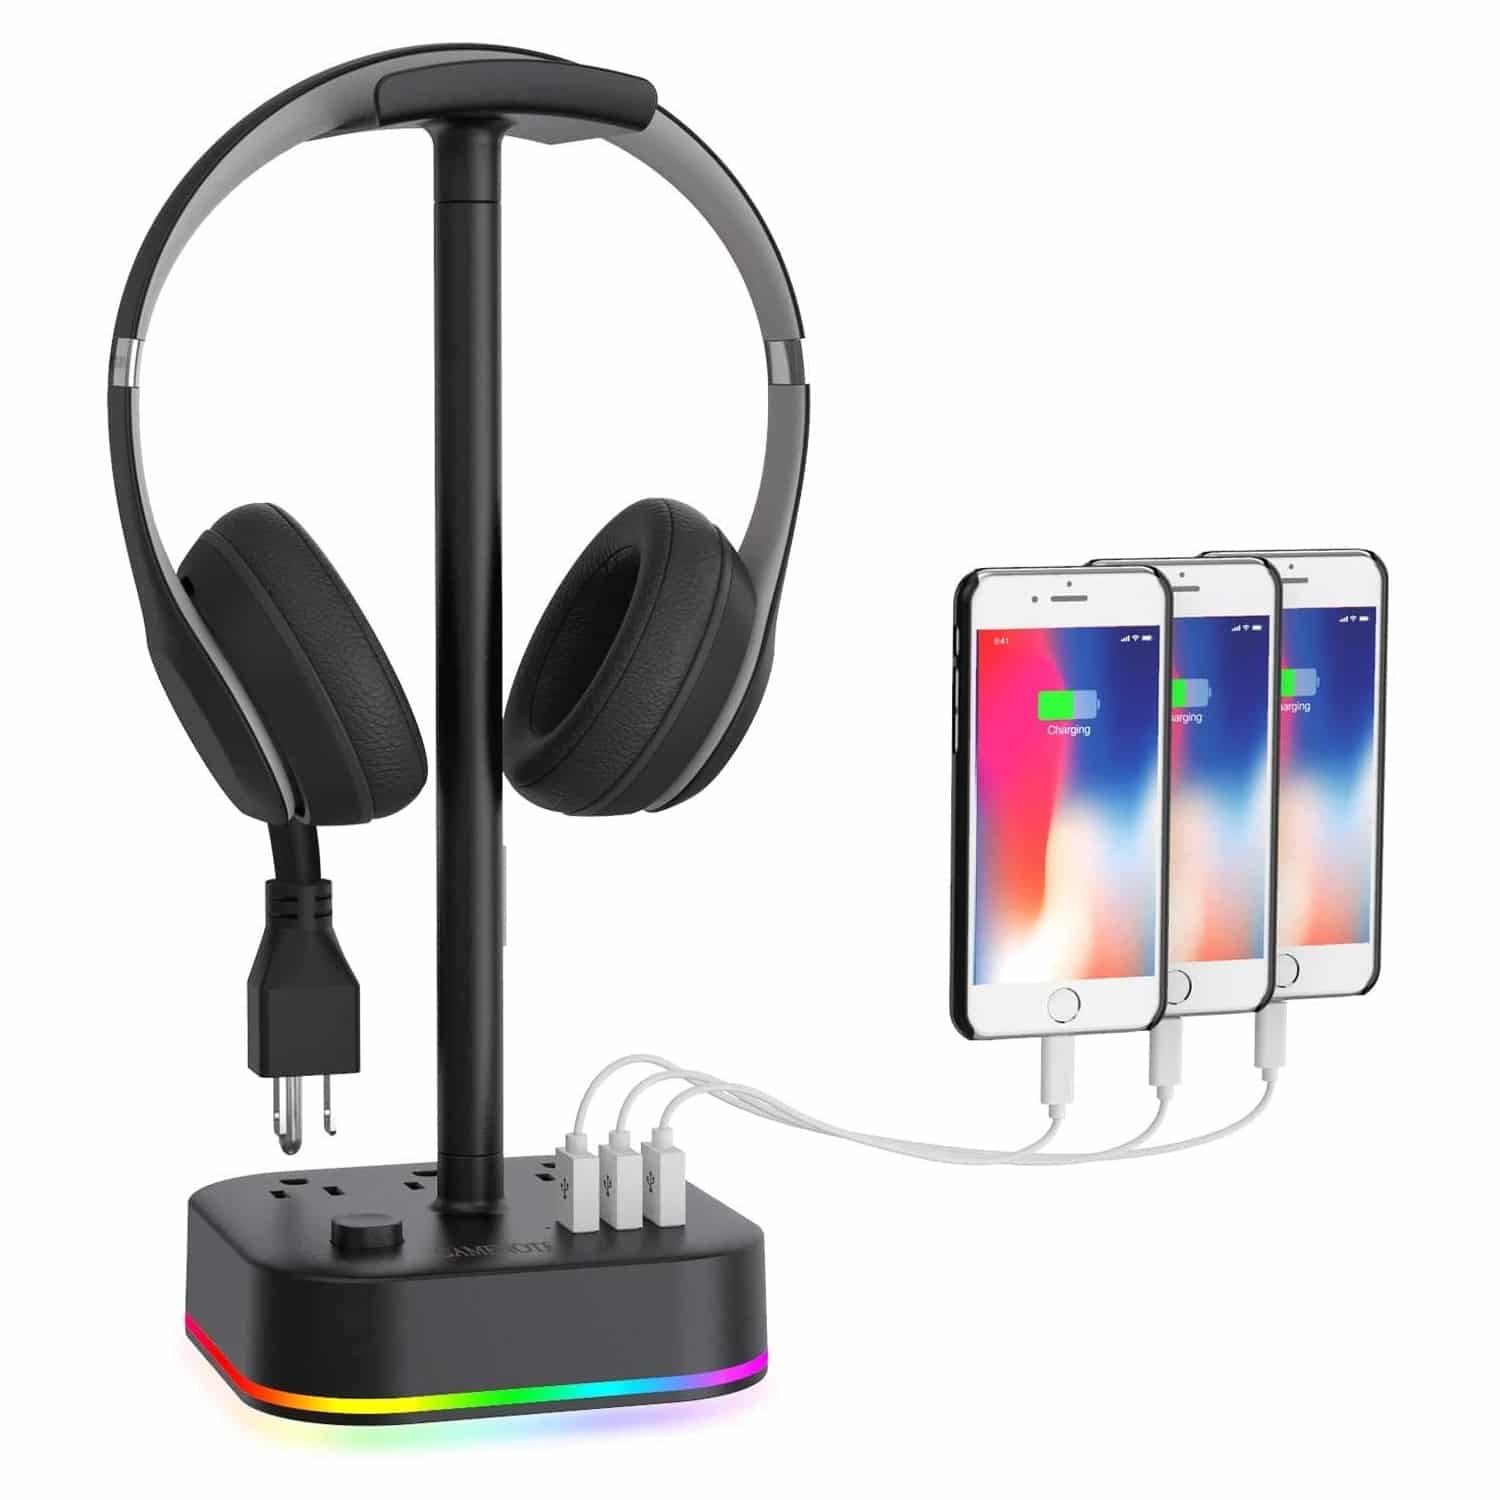 https://cdn.shopify.com/s/files/1/0551/9563/1814/products/havit-dpm05-rgb-headset-stand-with-3-usb-charging-ports-3-power-outlets-new.jpg?v=1615367854&width=1500